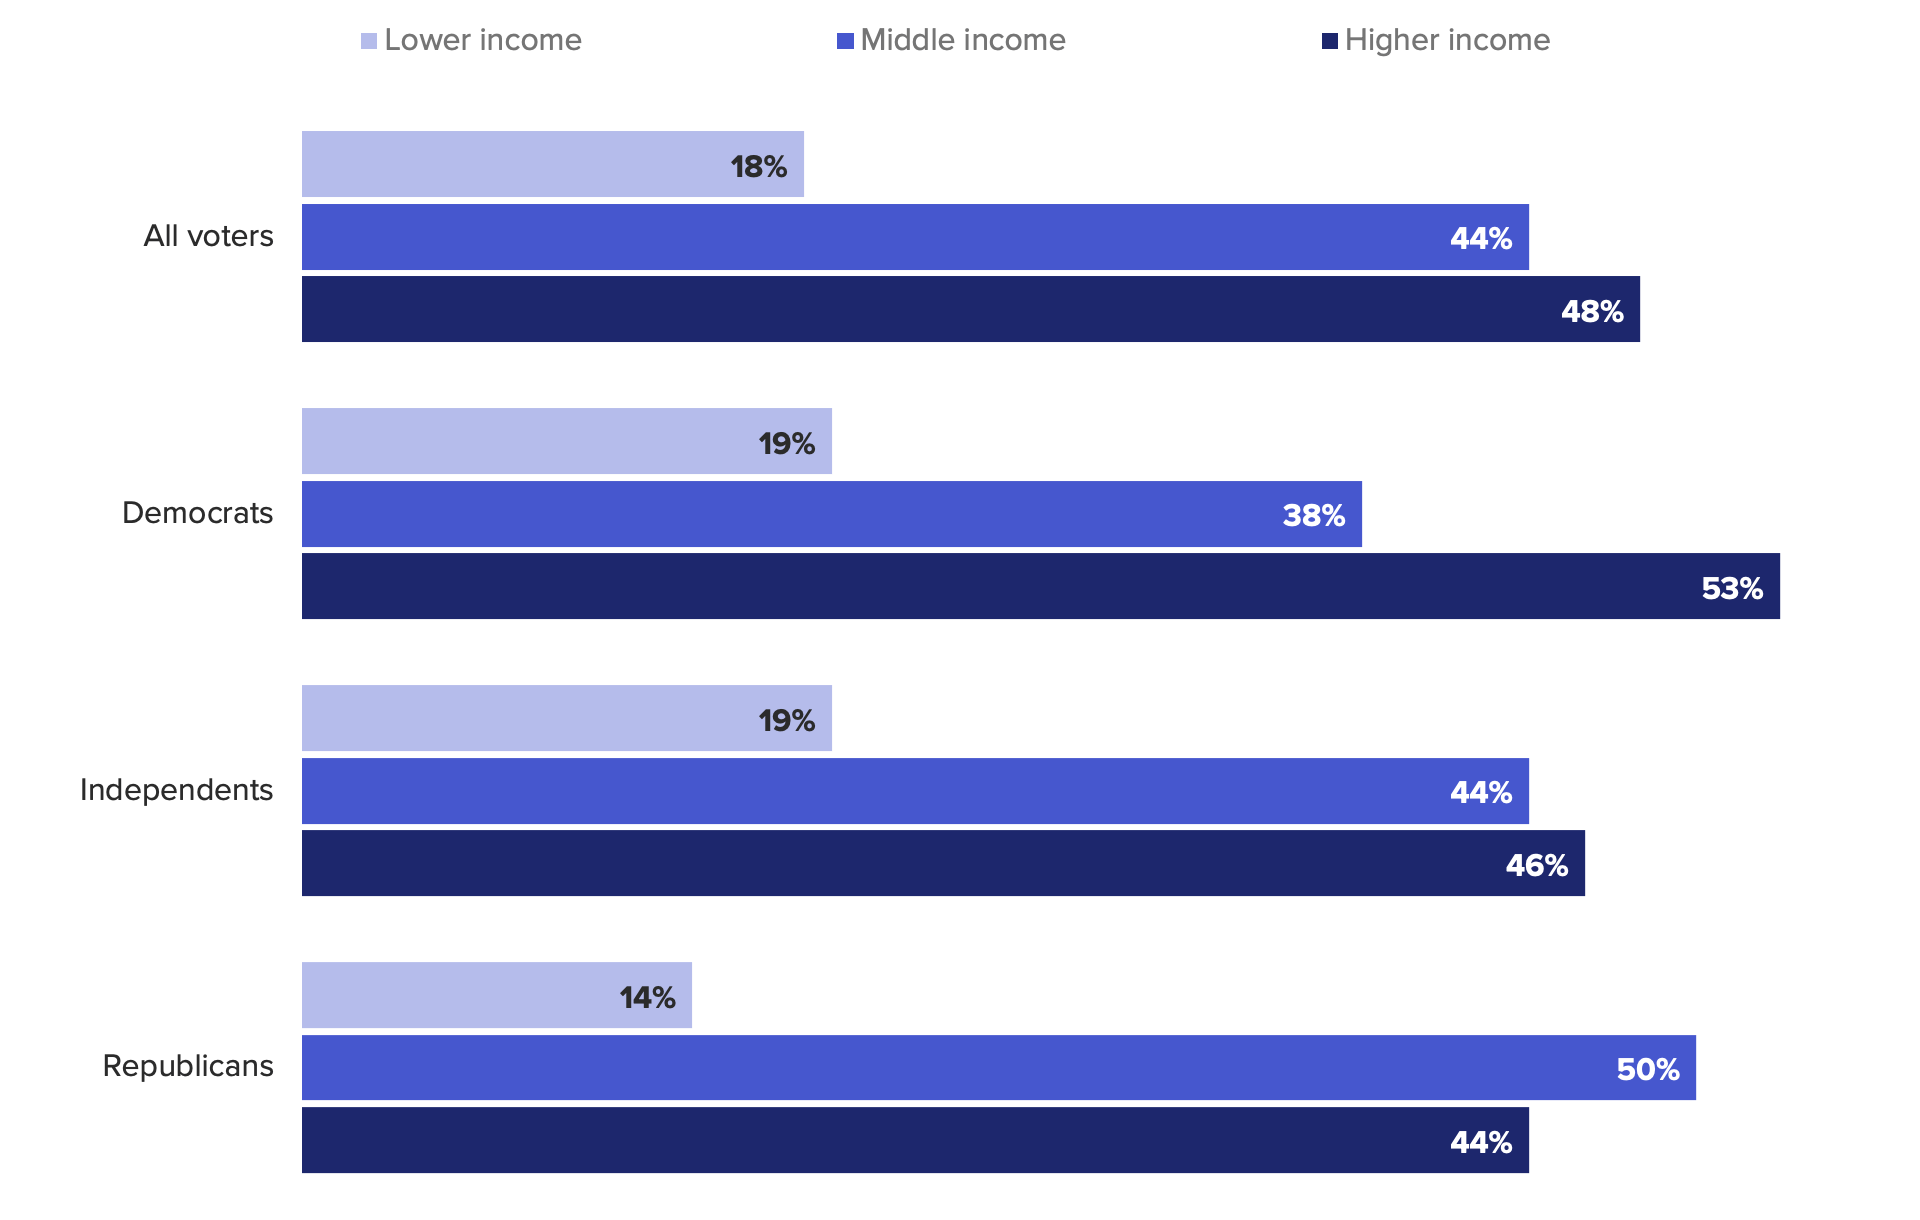 Bar chart showing which income group voters think would be most targeted by an increase in audits from the IRS. Voters think high-income earners will bear the brunt of increased audits.